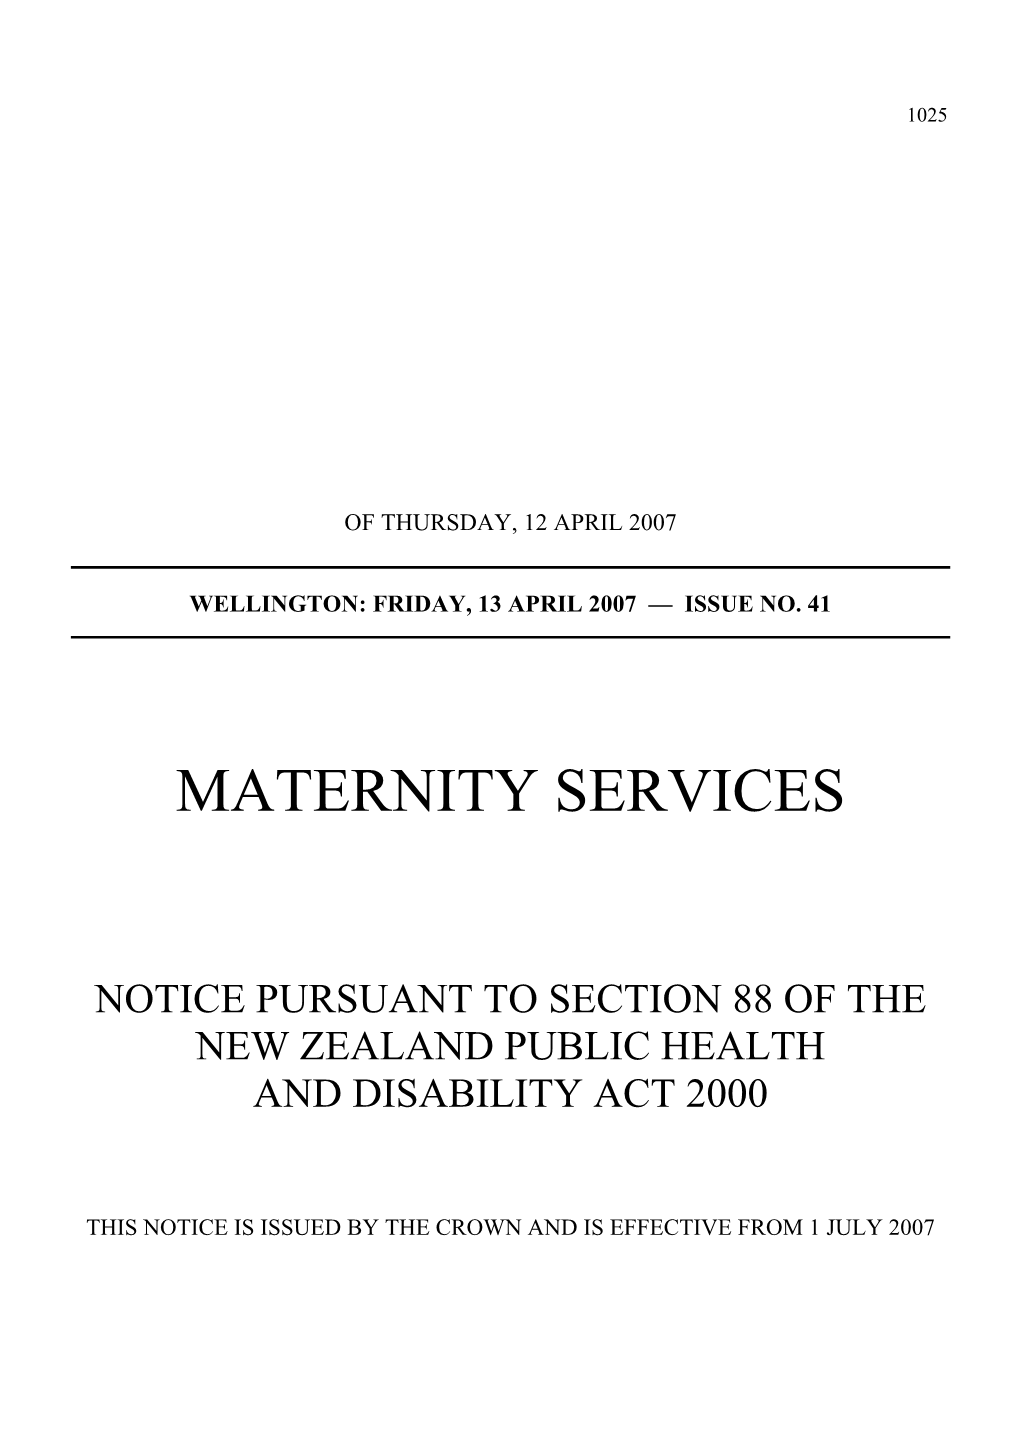 Maternity Services: Notice Pursuant to Section 88 of the New Zealand